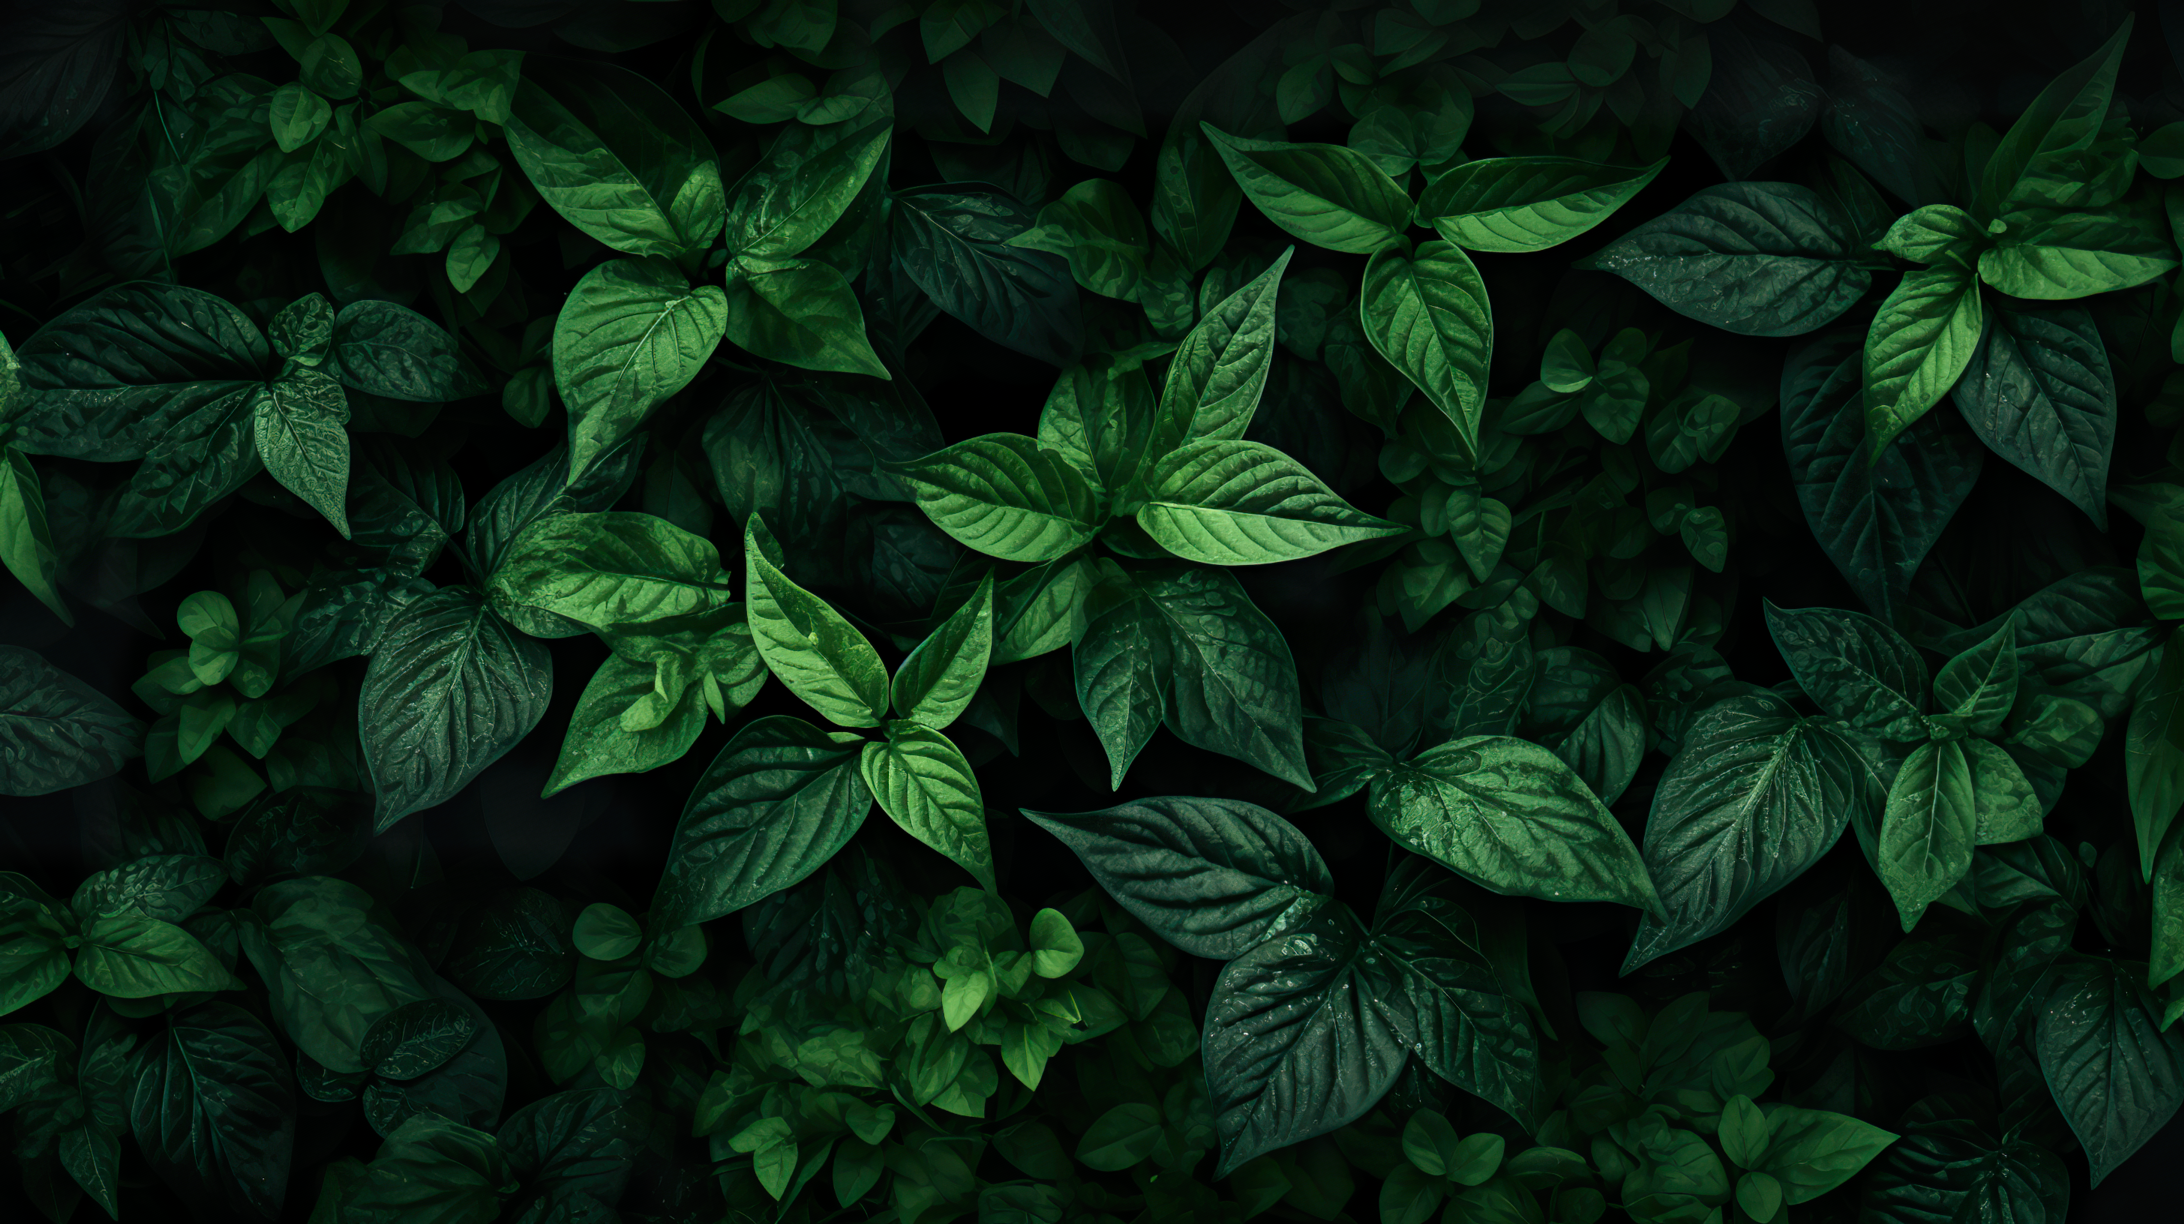 HD wallpaper with a lush green aesthetic of overlapping leaves for desktop background.